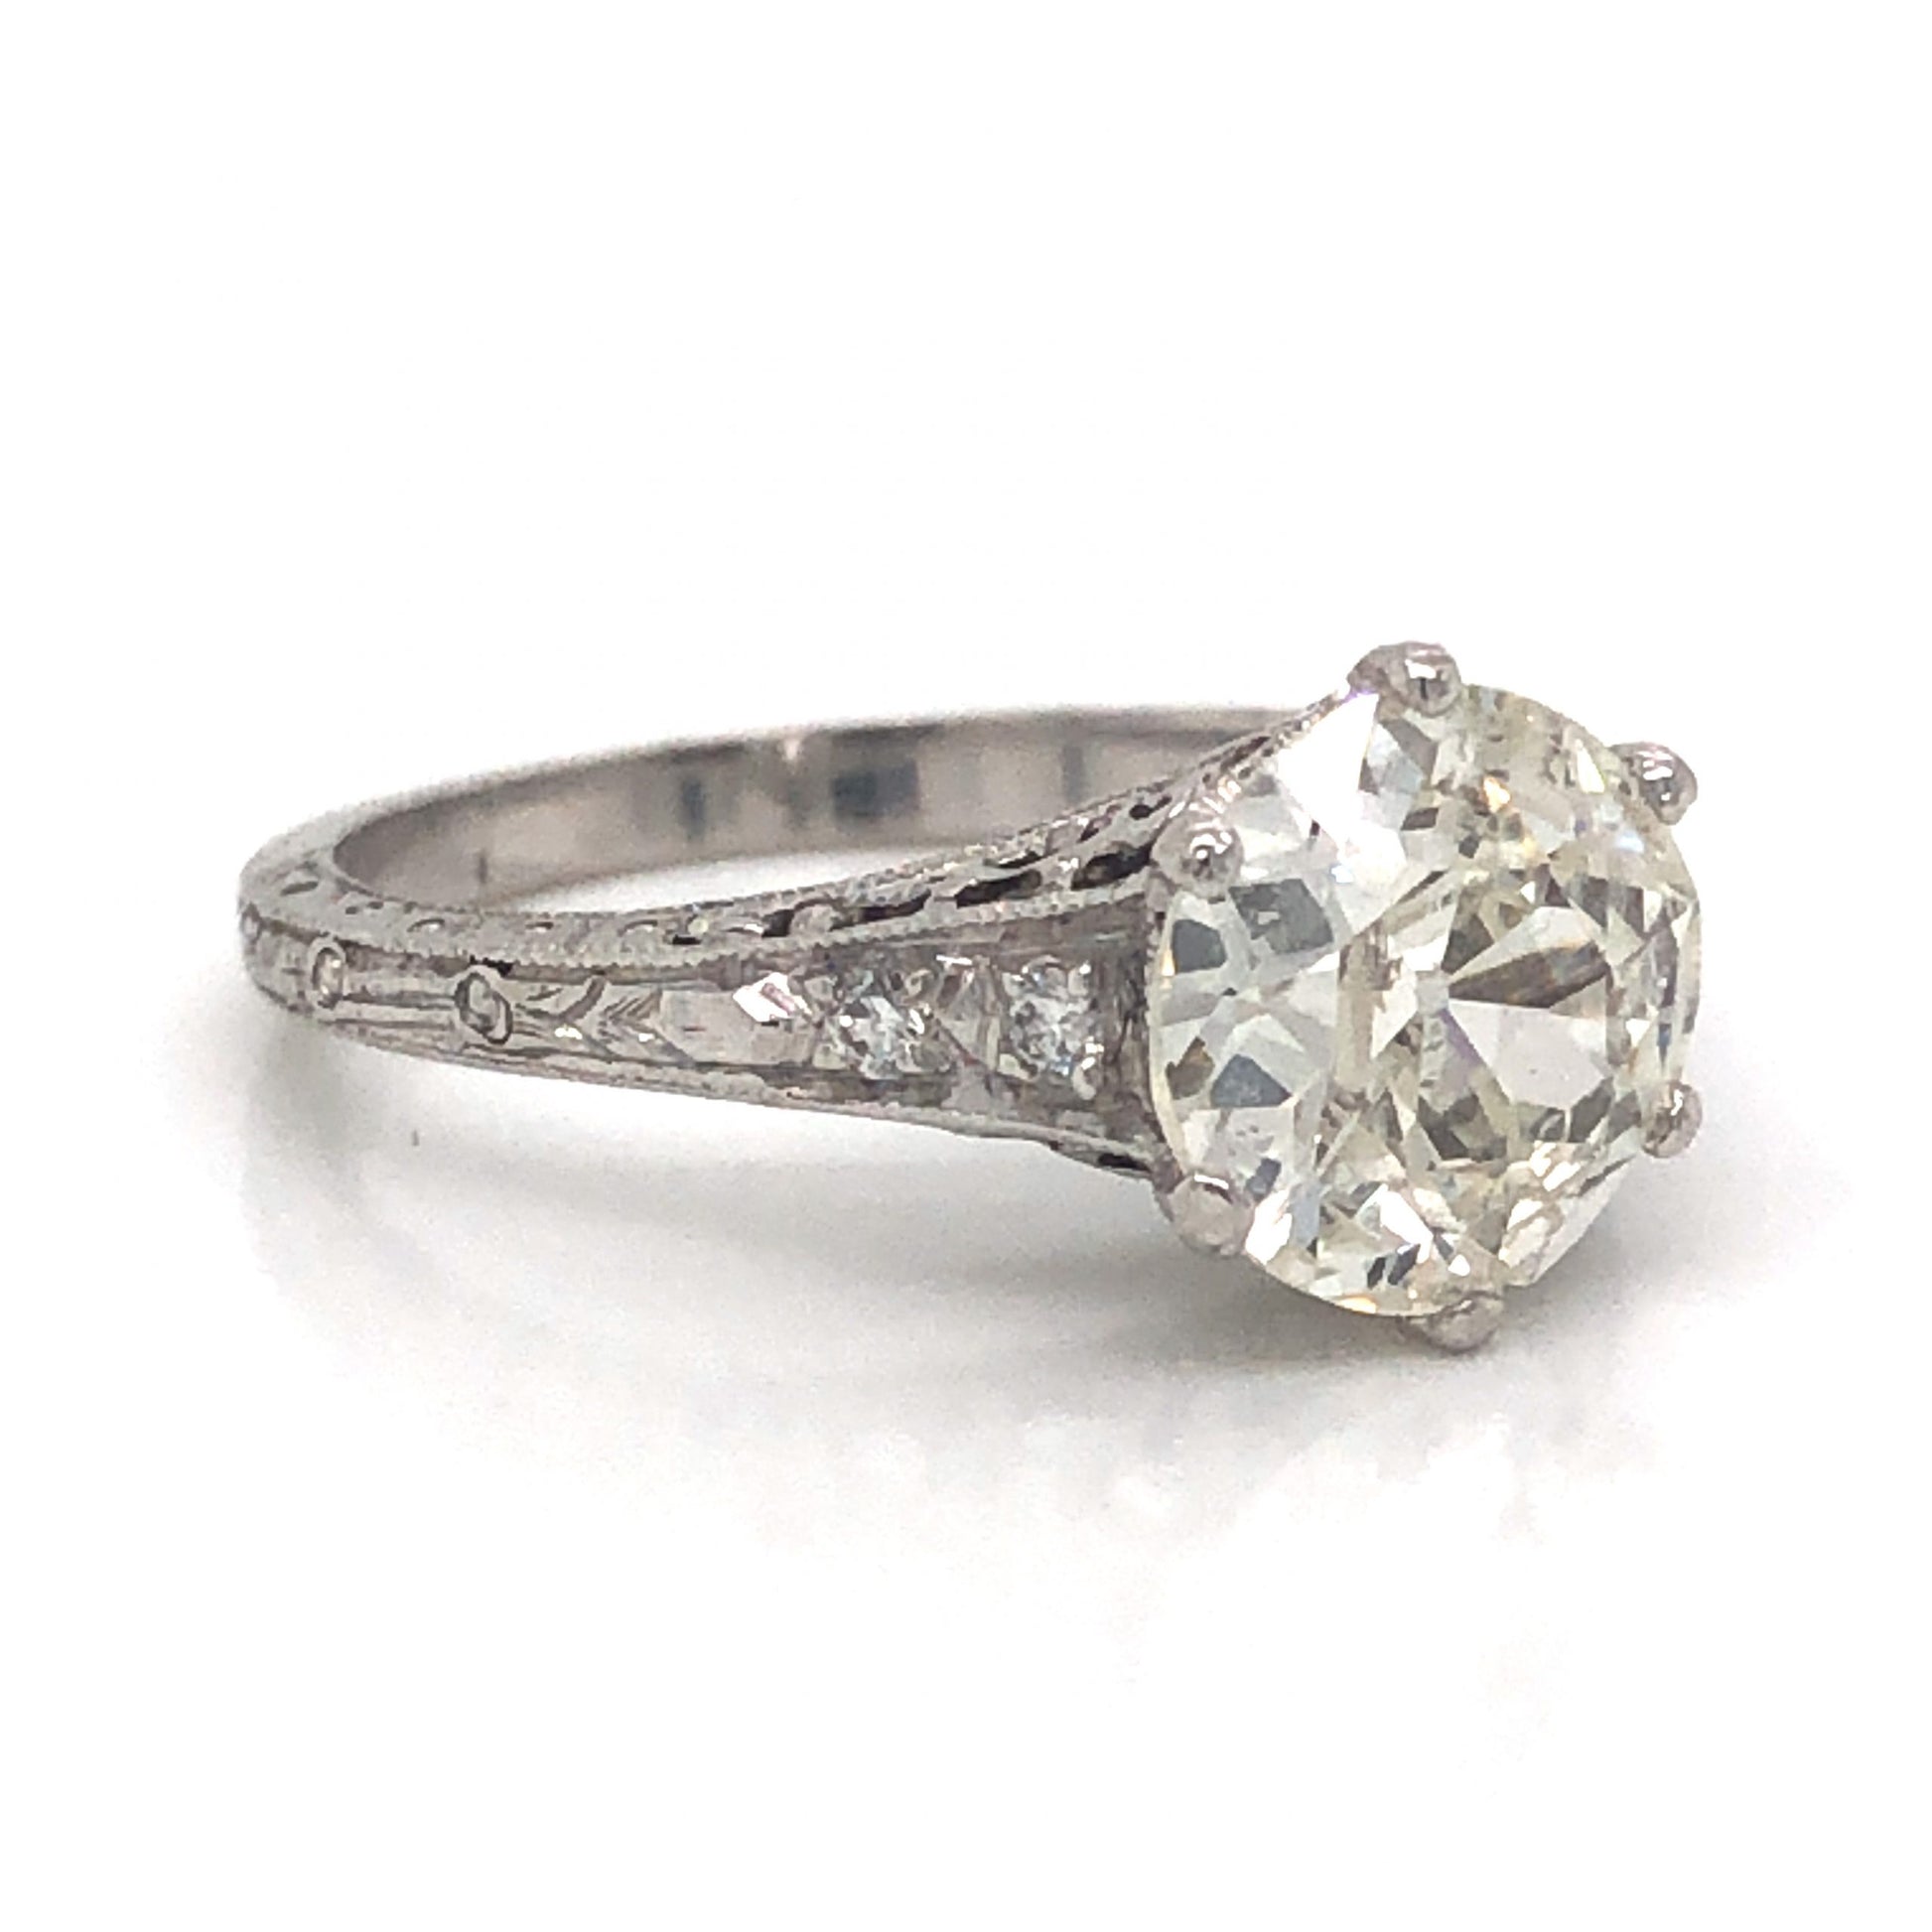 1.52 Art Deco Diamond Filigree Engagement Ring in PlatinumComposition: PlatinumRing Size: 4.25Total Diamond Weight: 1.58 ctTotal Gram Weight: 4.0 gInscription: PLAT , 3